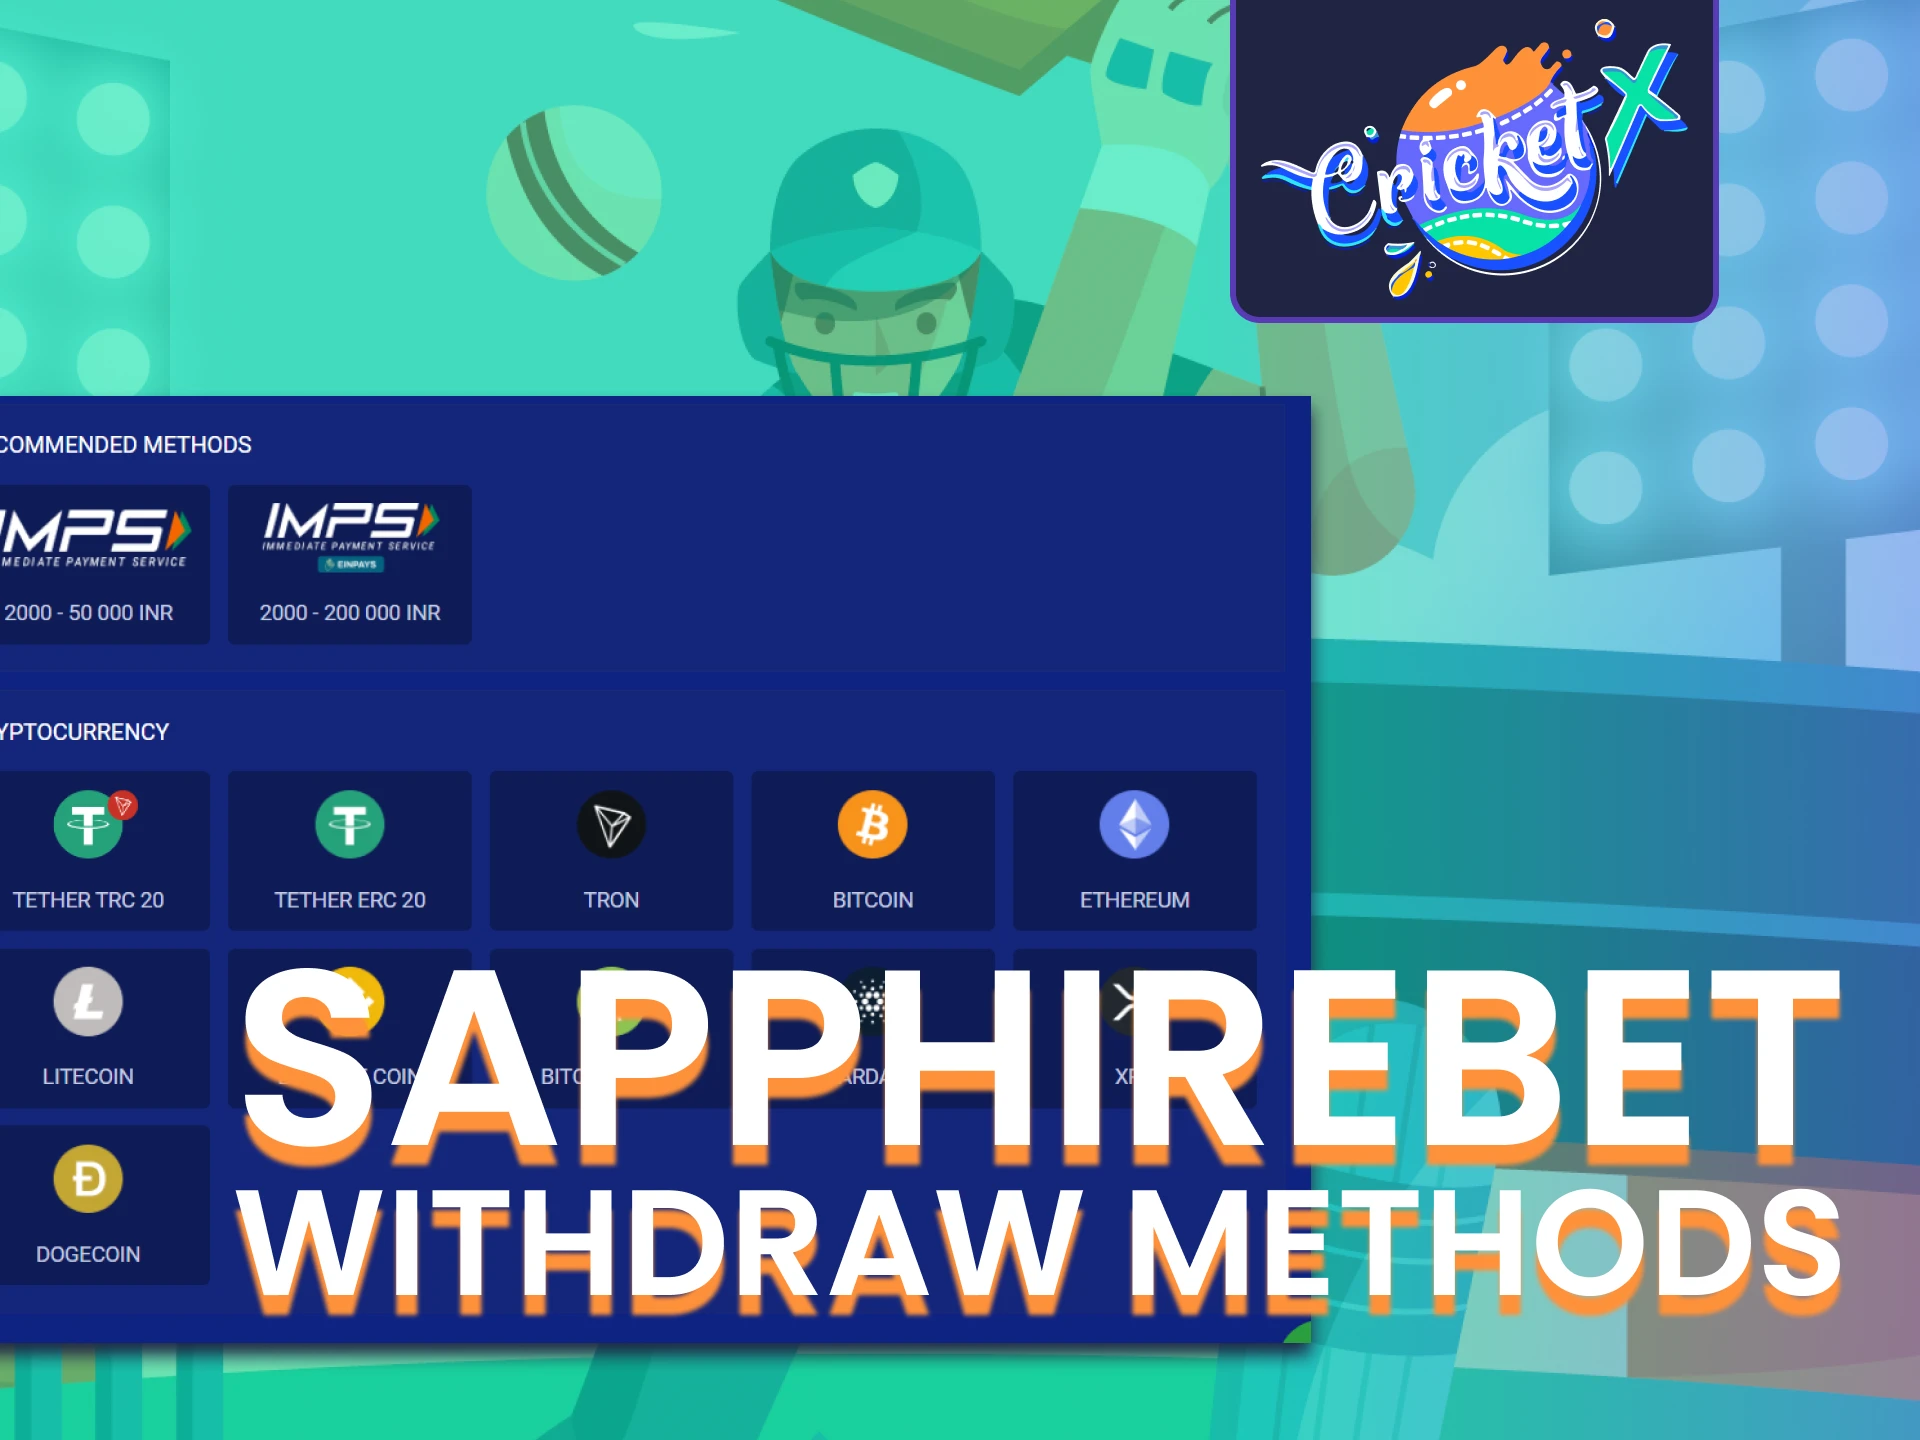 Find out how to withdraw funds on the Sapphirebet website.